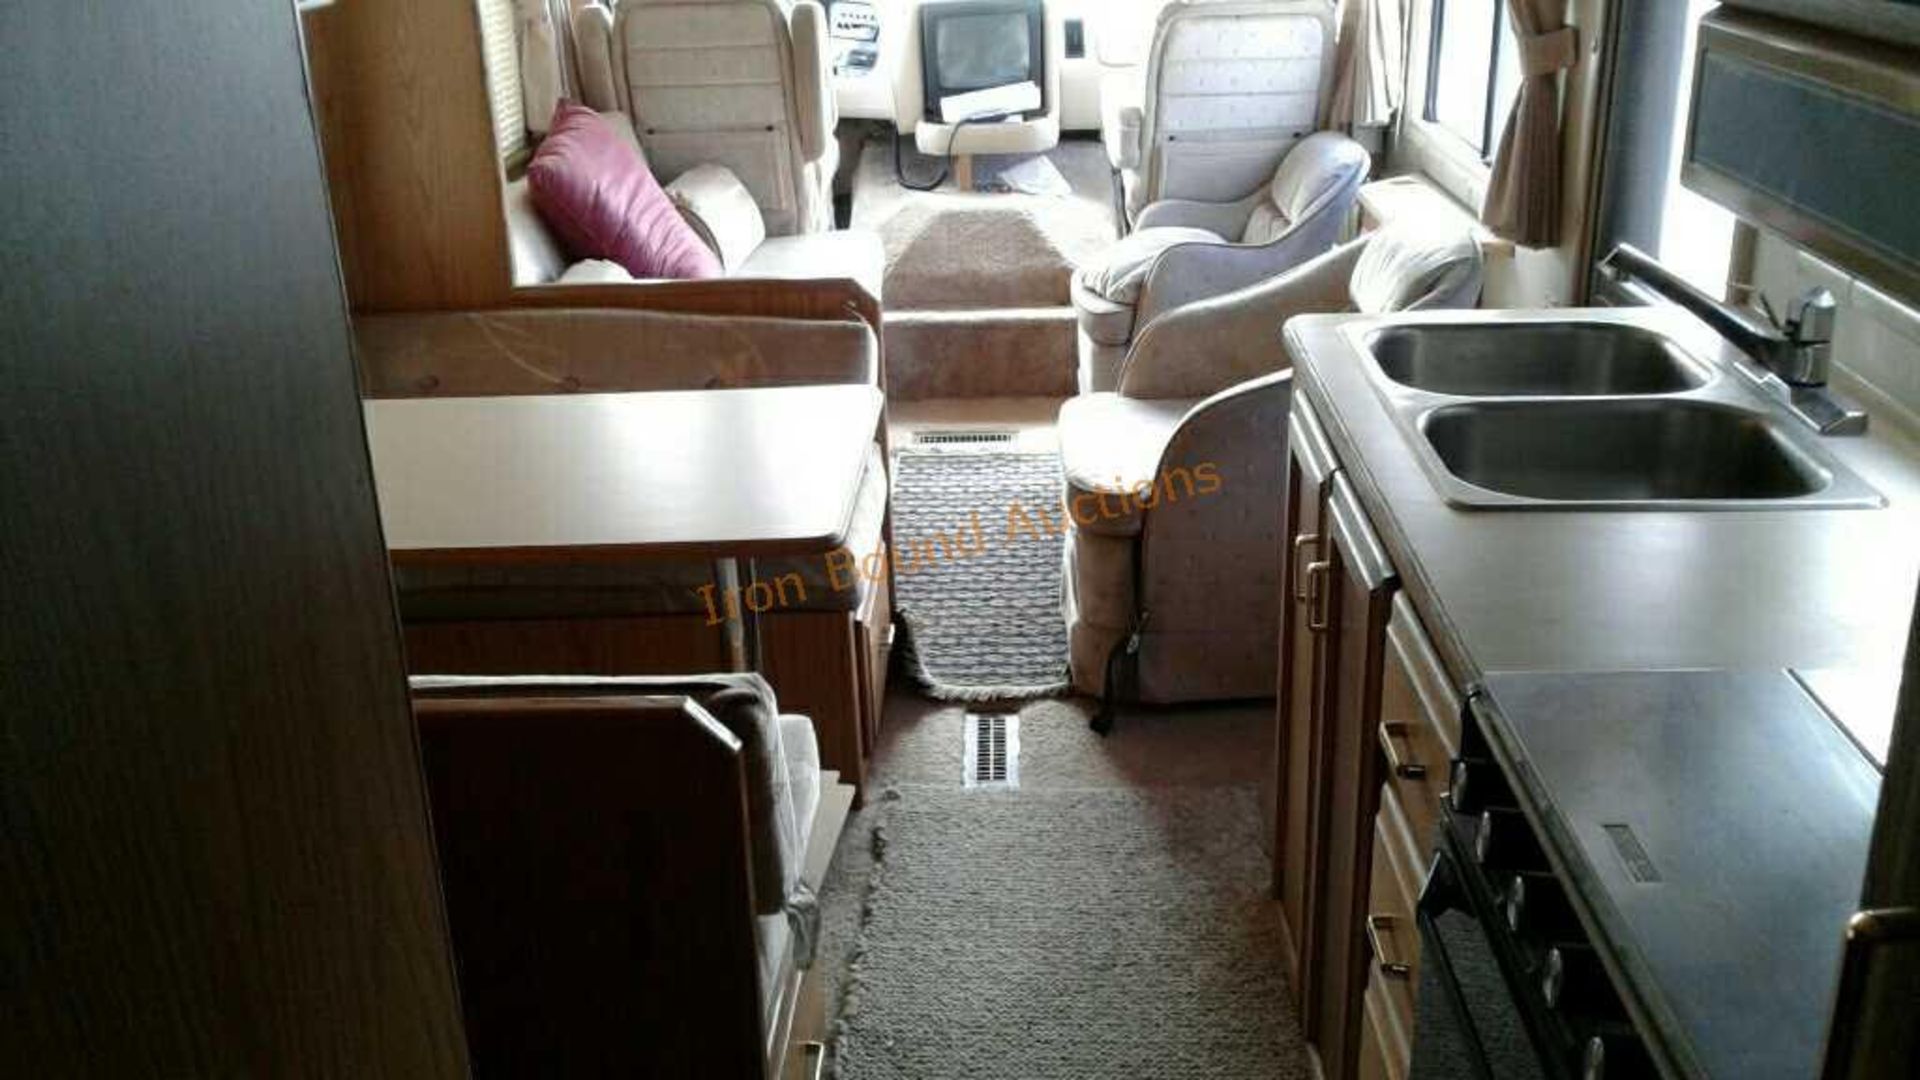 1989 Holiday Rambler Imperial Motorhome - Image 20 of 25